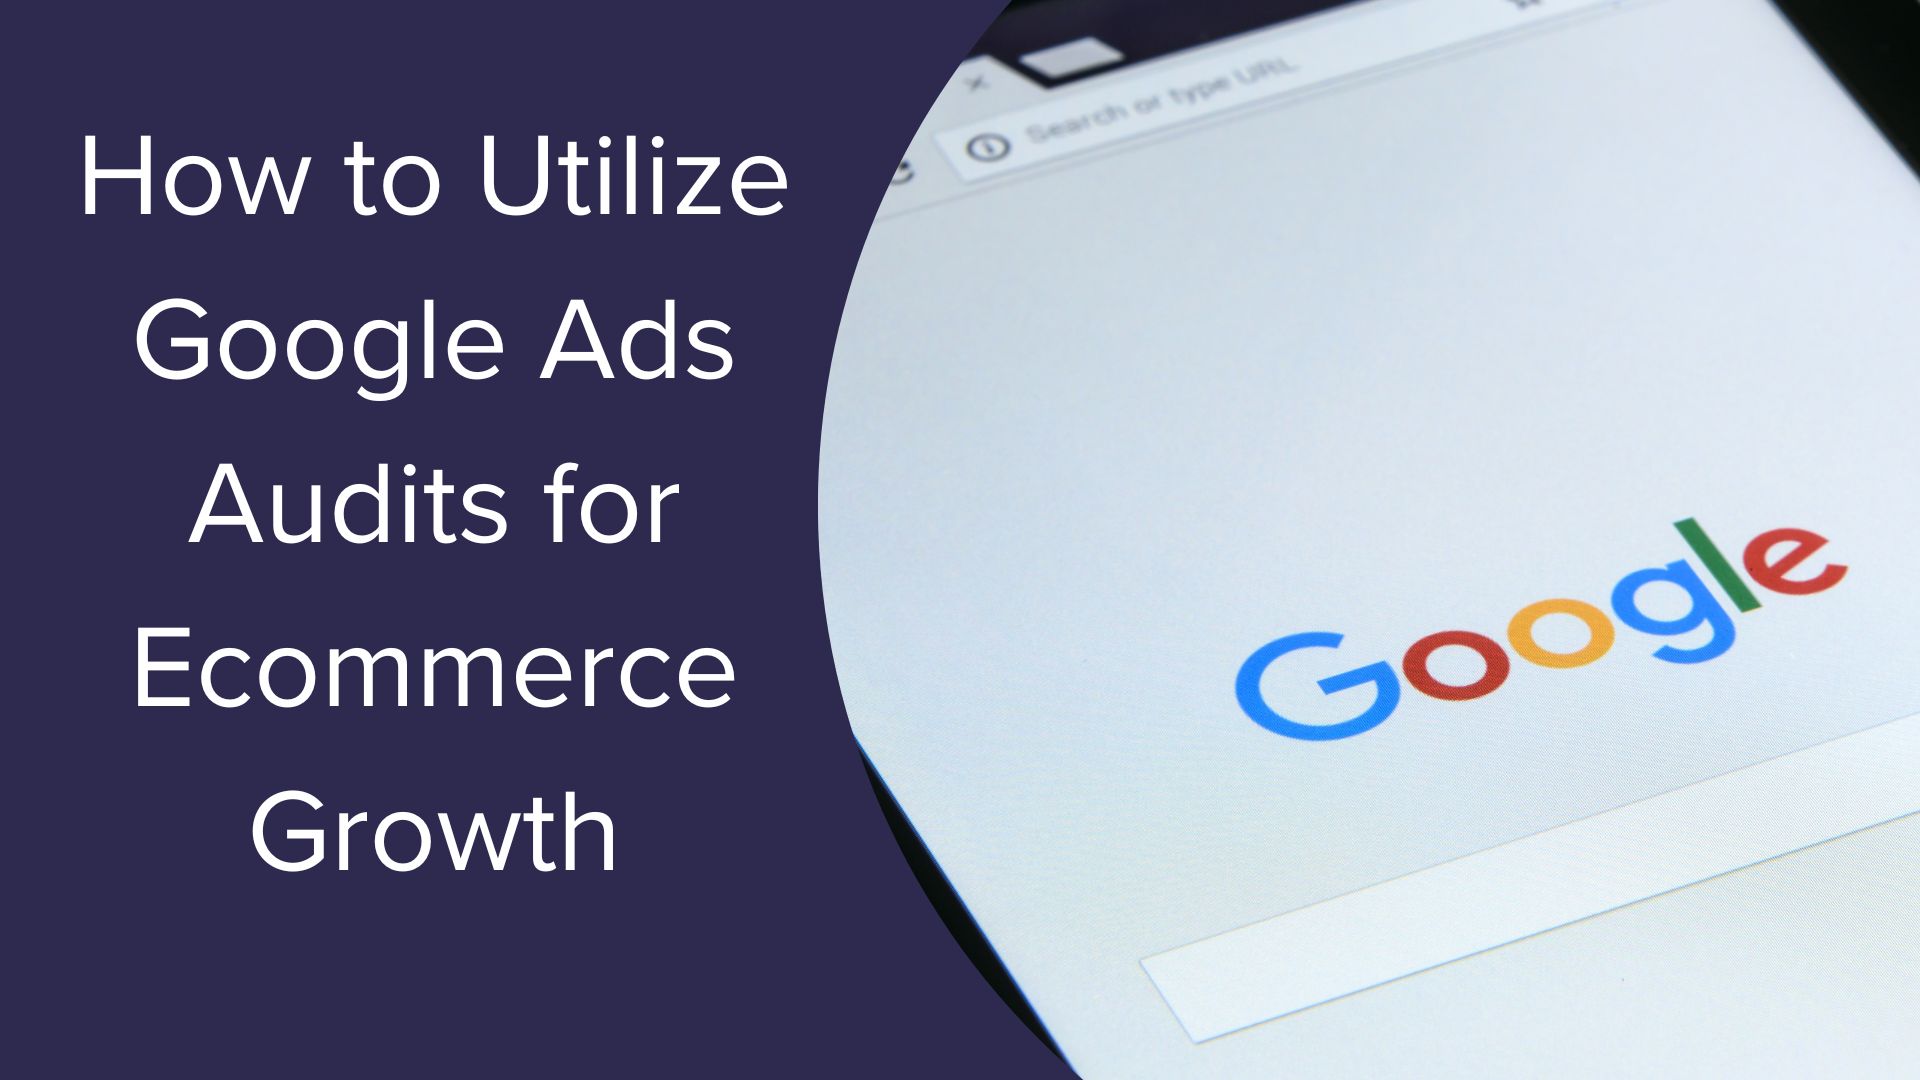 How to Utilize Google Ads Audits for Ecommerce Growth